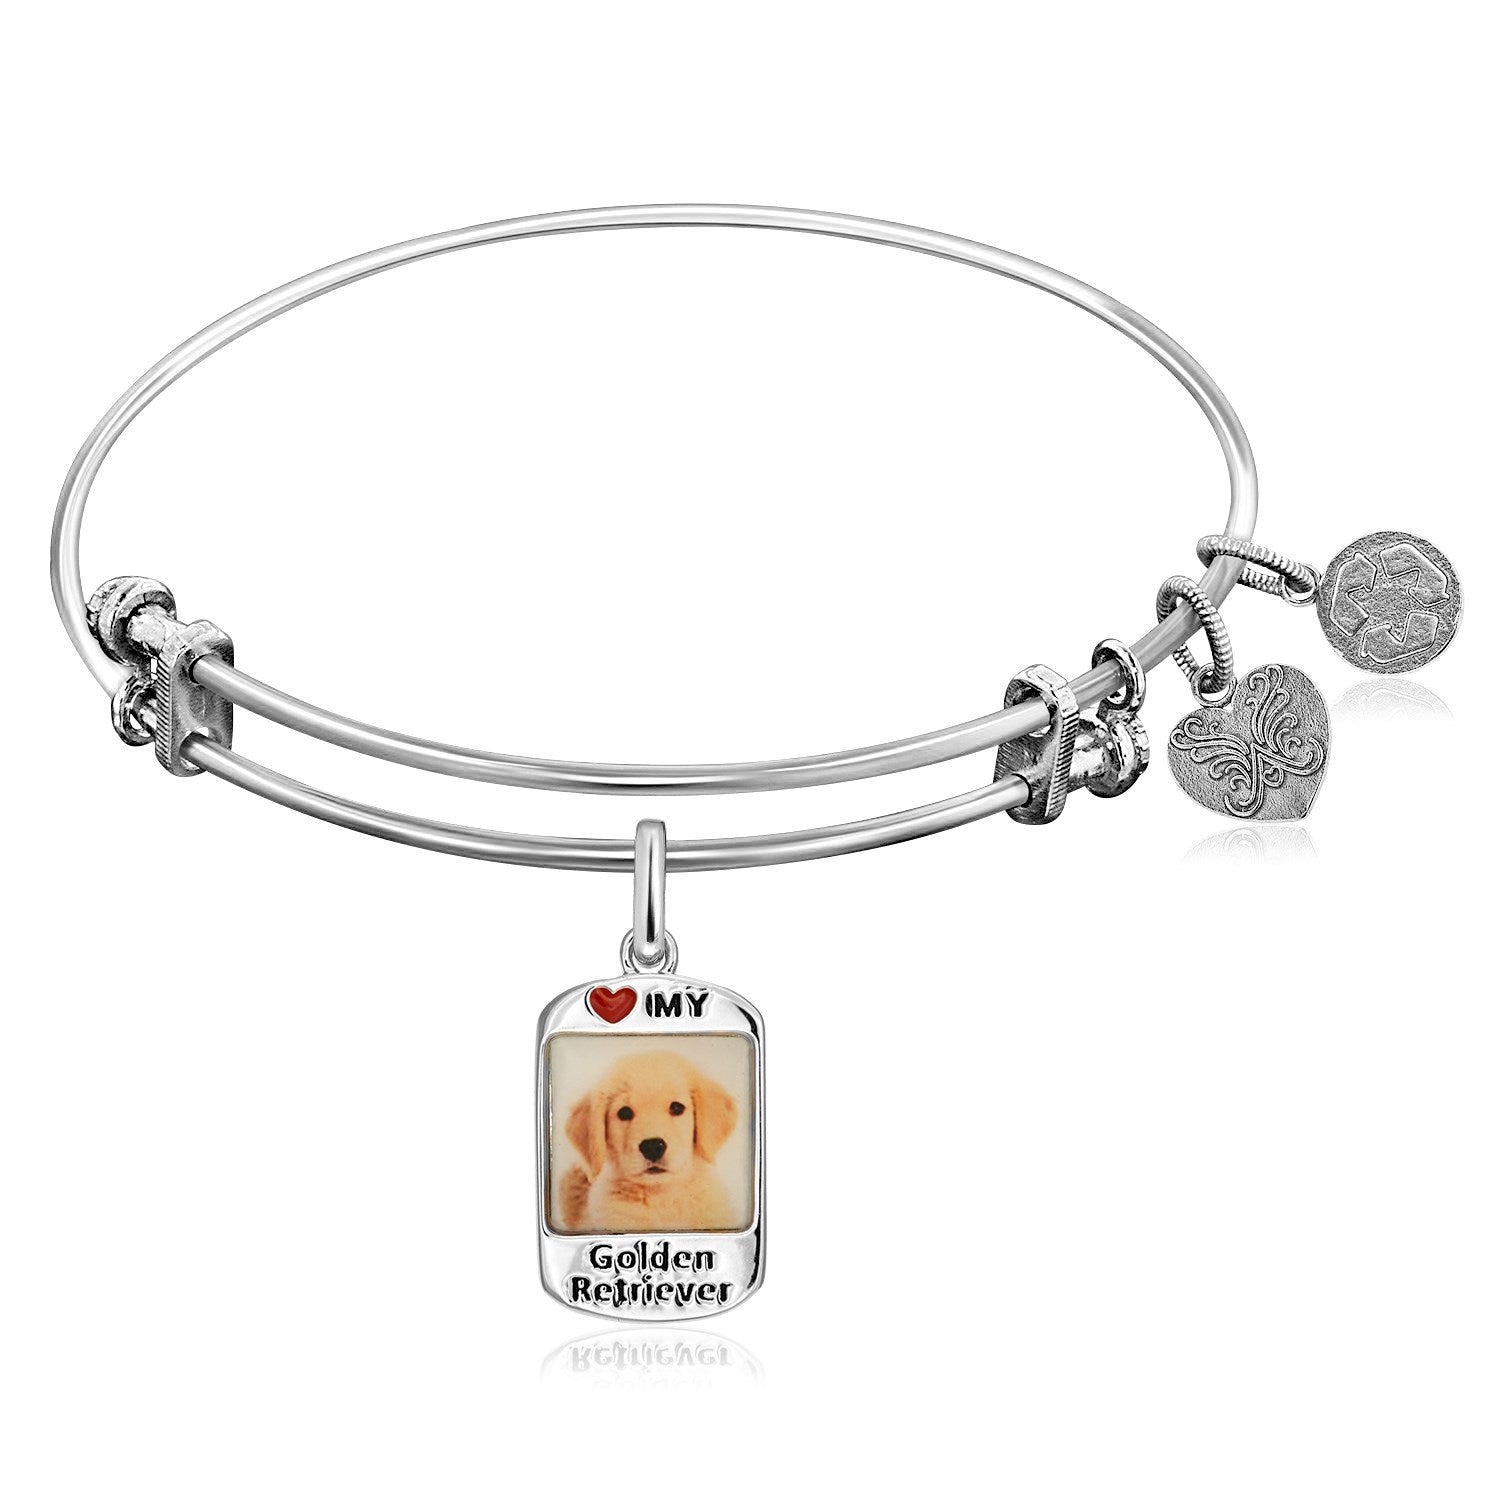 Expandable White Tone Brass Bangle with Golden Retriever Dog Charm